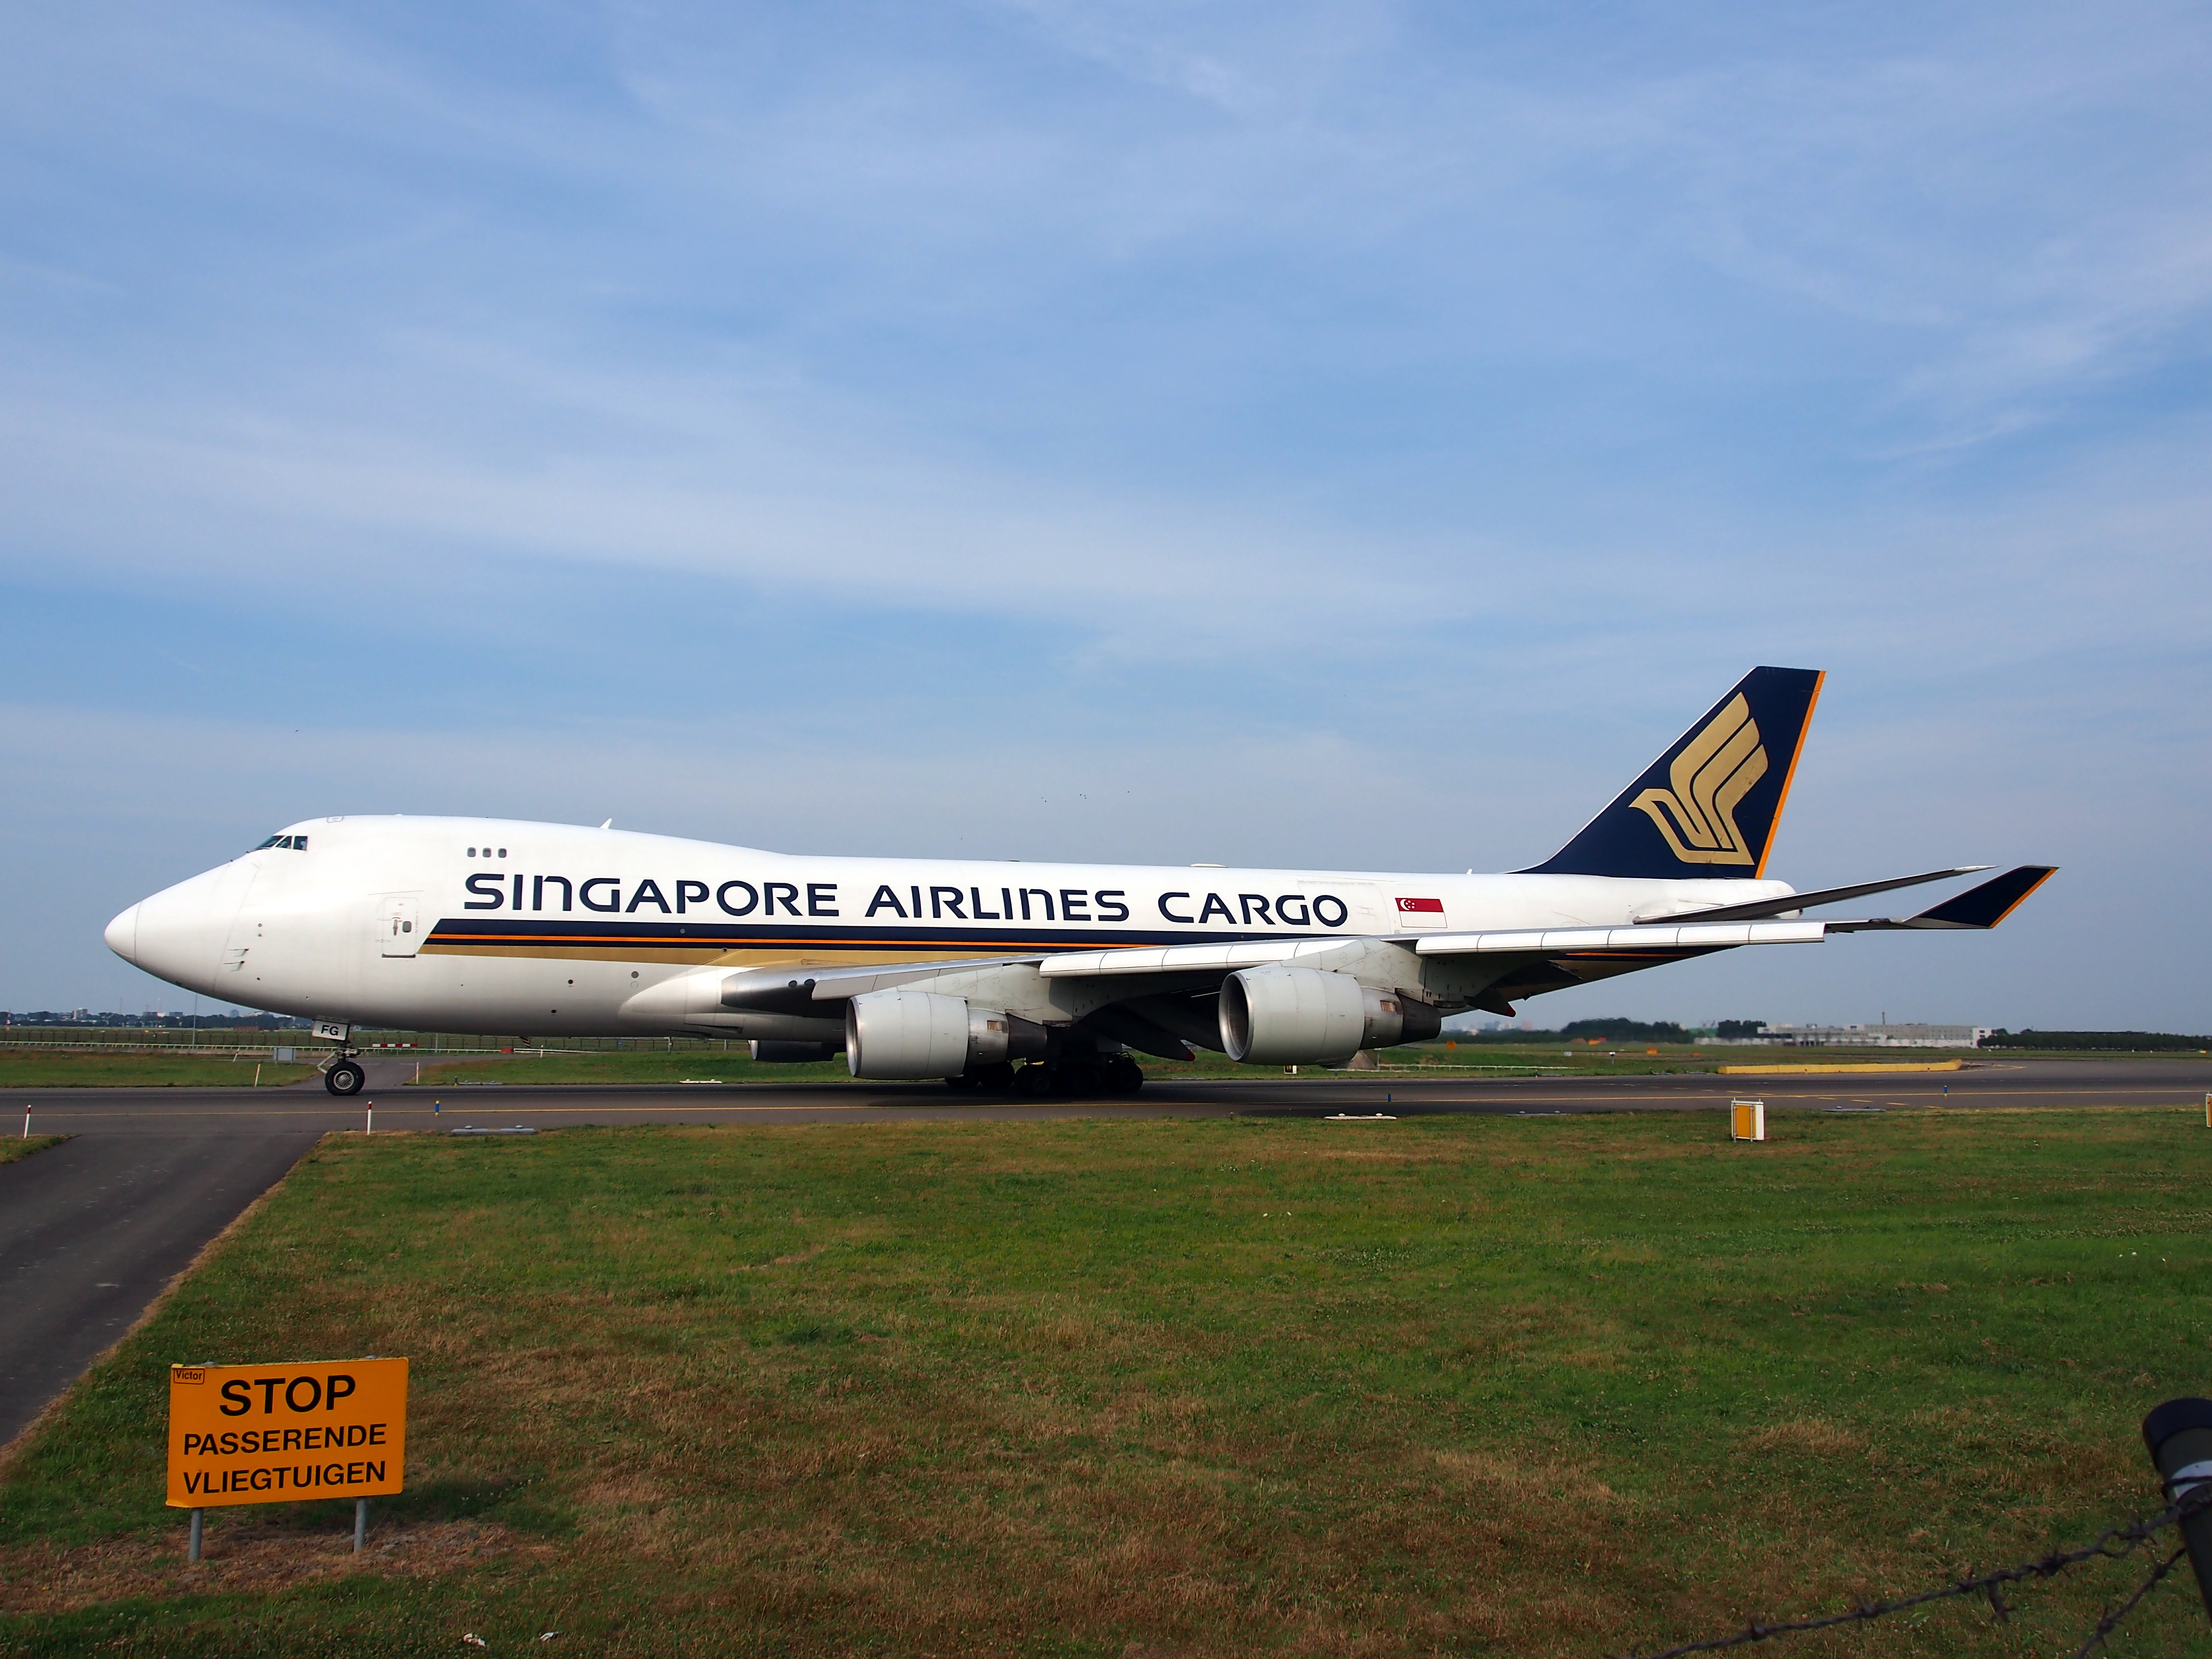 9V-SFG Singapore Airlines Cargo Boeing 747-412F - cn 26558, taxiing 22july2013 pic-005